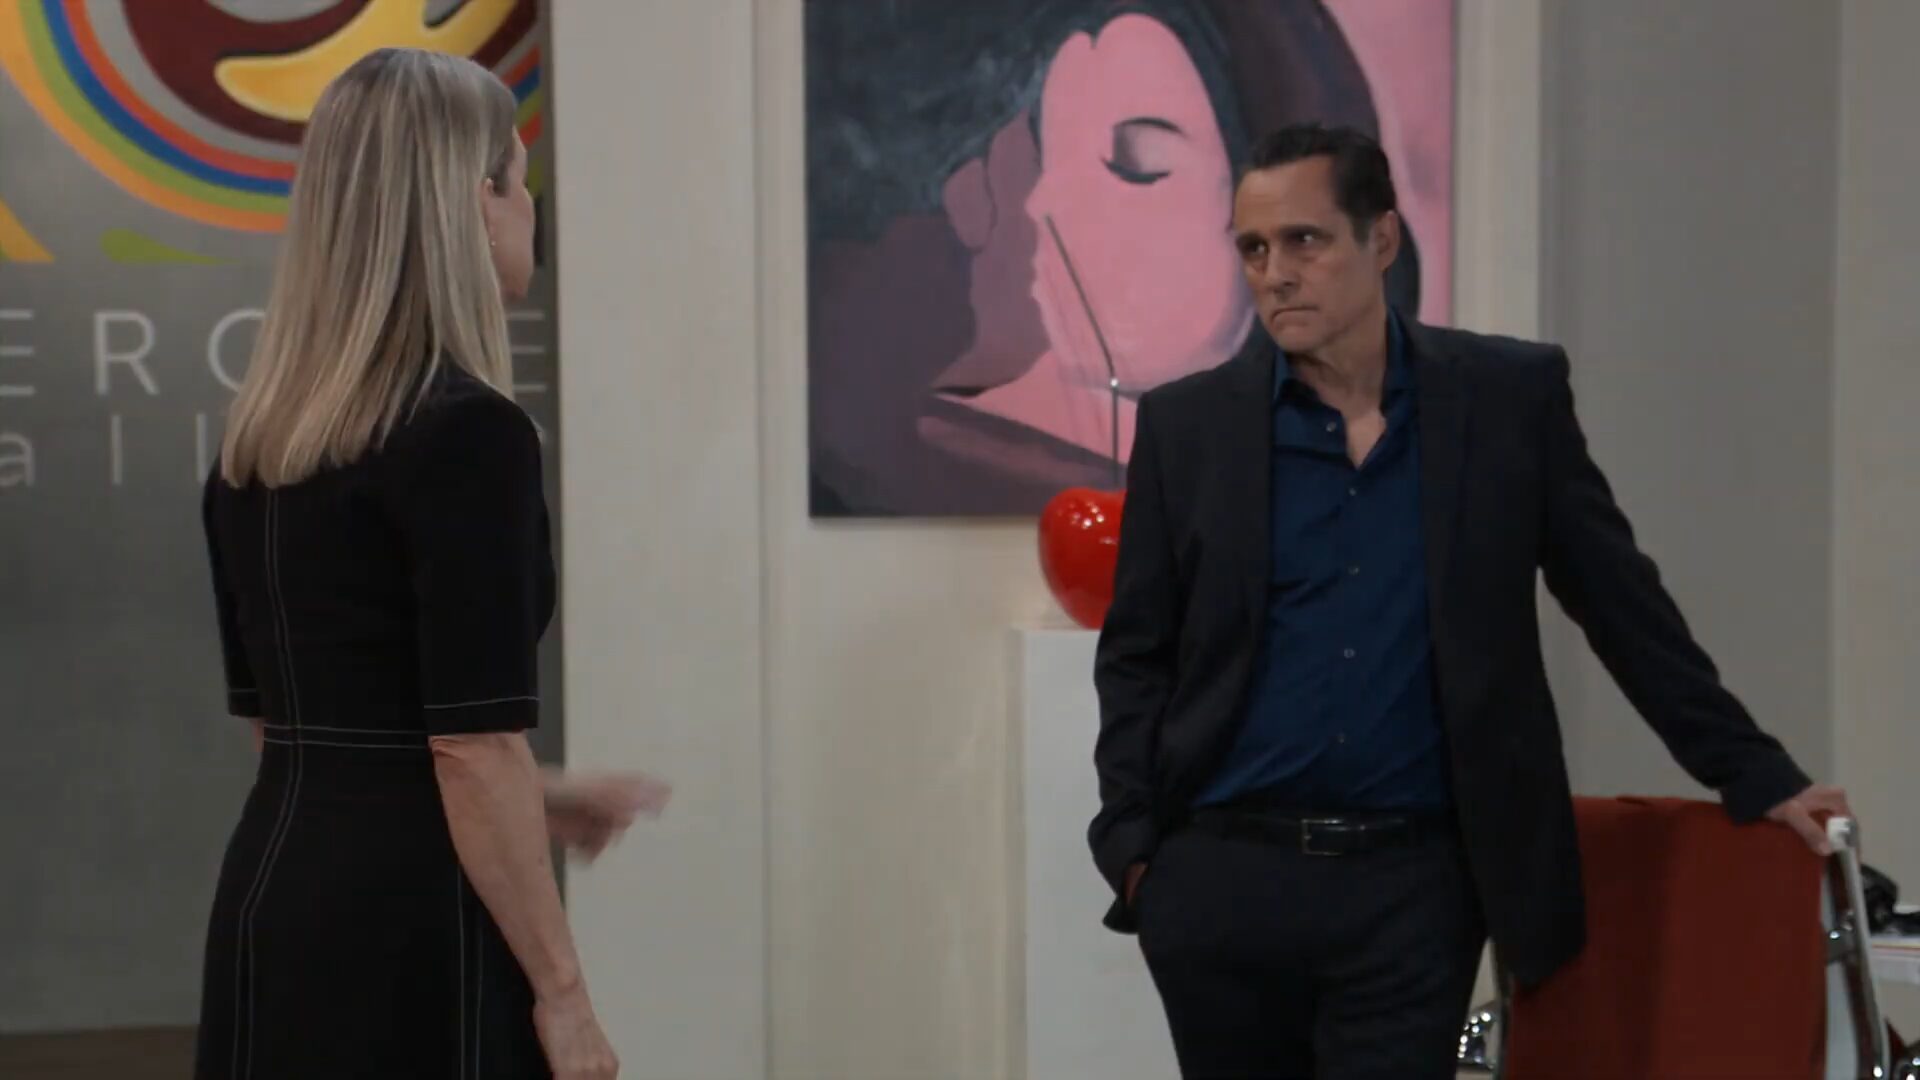 sonny and nina in gallery